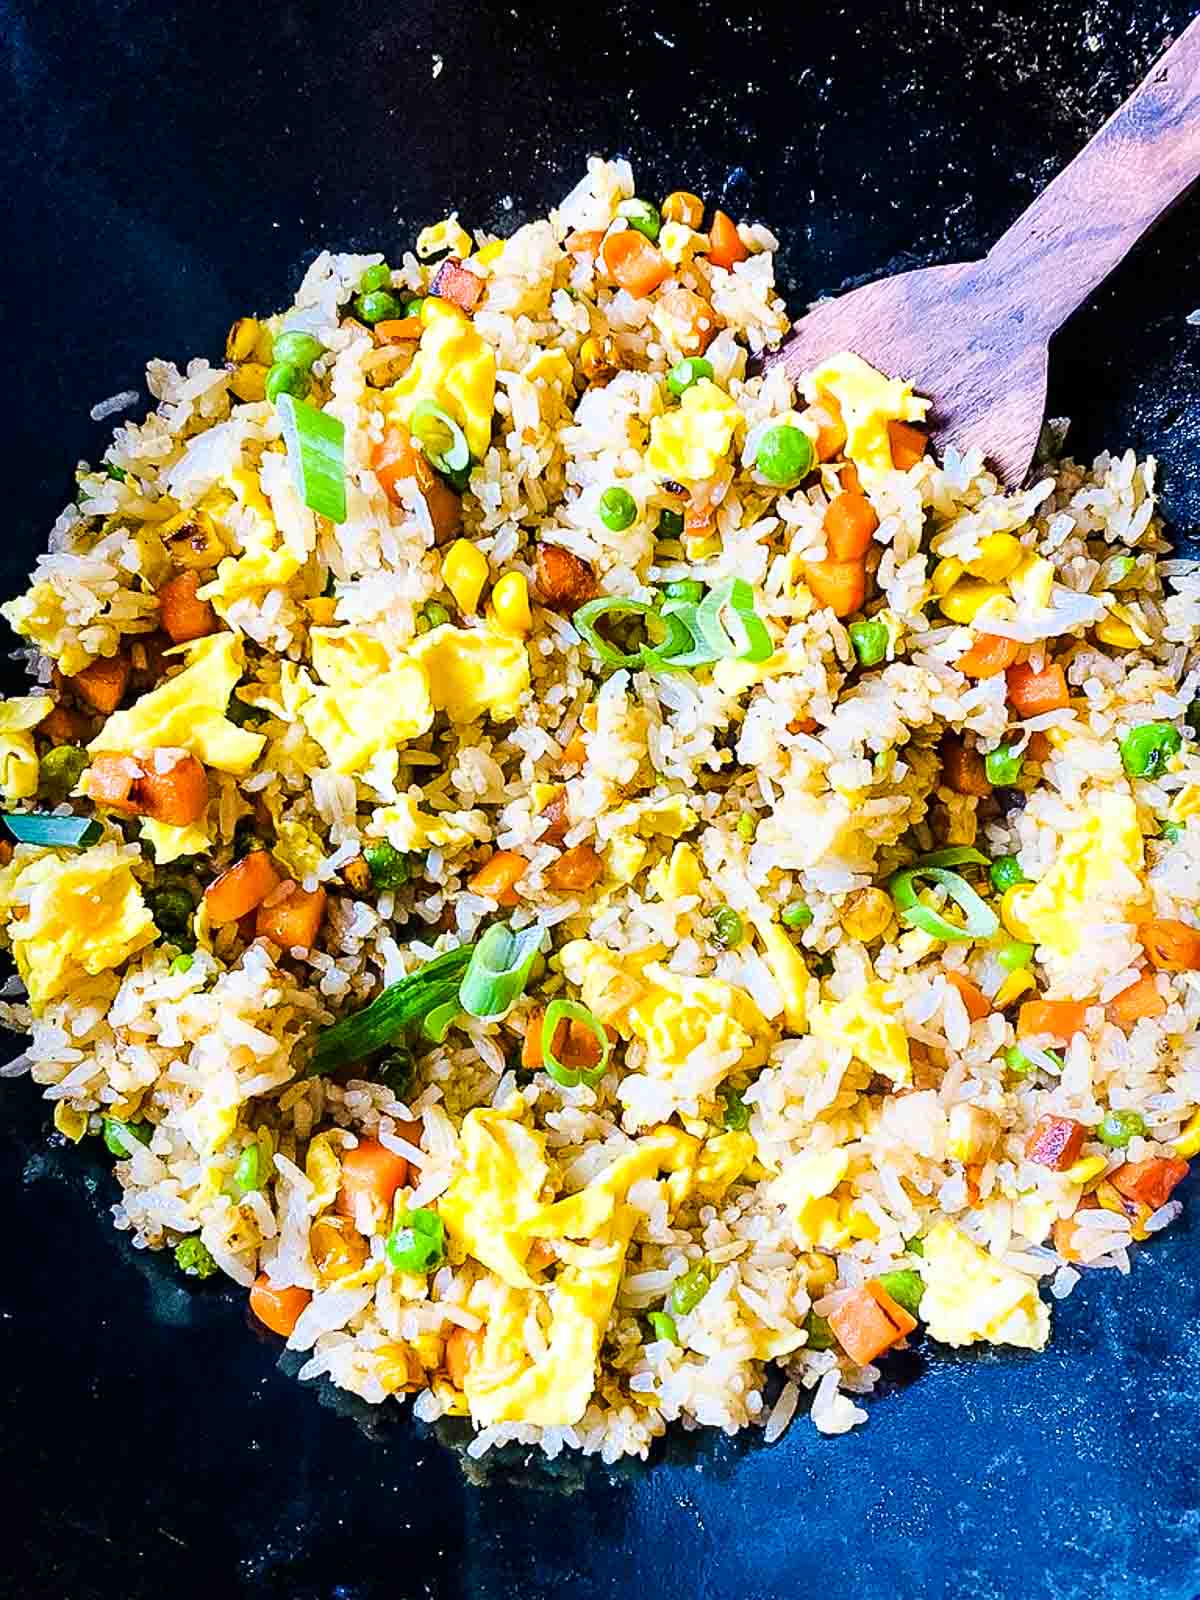 Fried Rice With Frozen Vegetables in Wok WIth Wooden Spoon